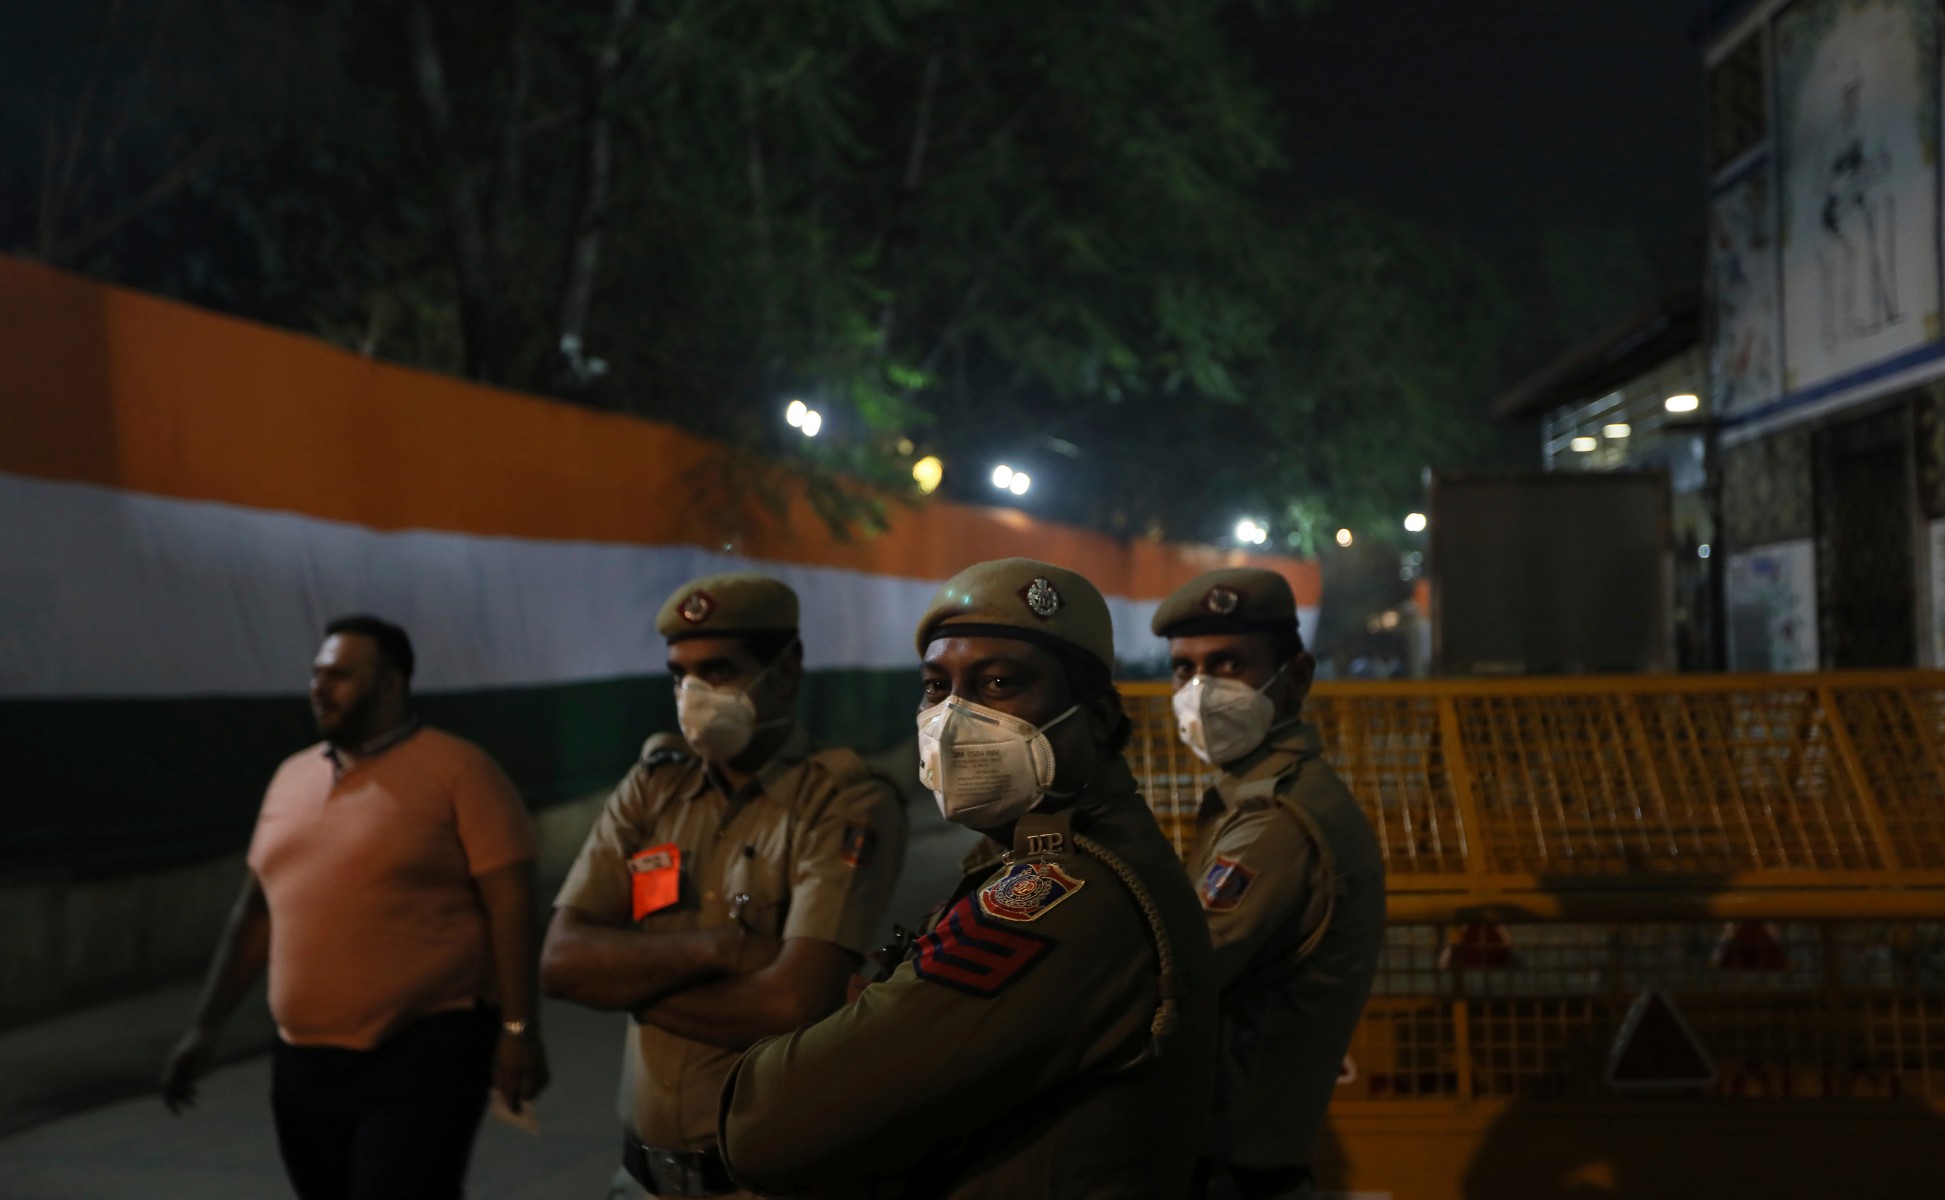 , Cricketers VOMIT on pitch and wear pollution masks in Delhi as killer smog ruins Indias clash vs Bangladesh